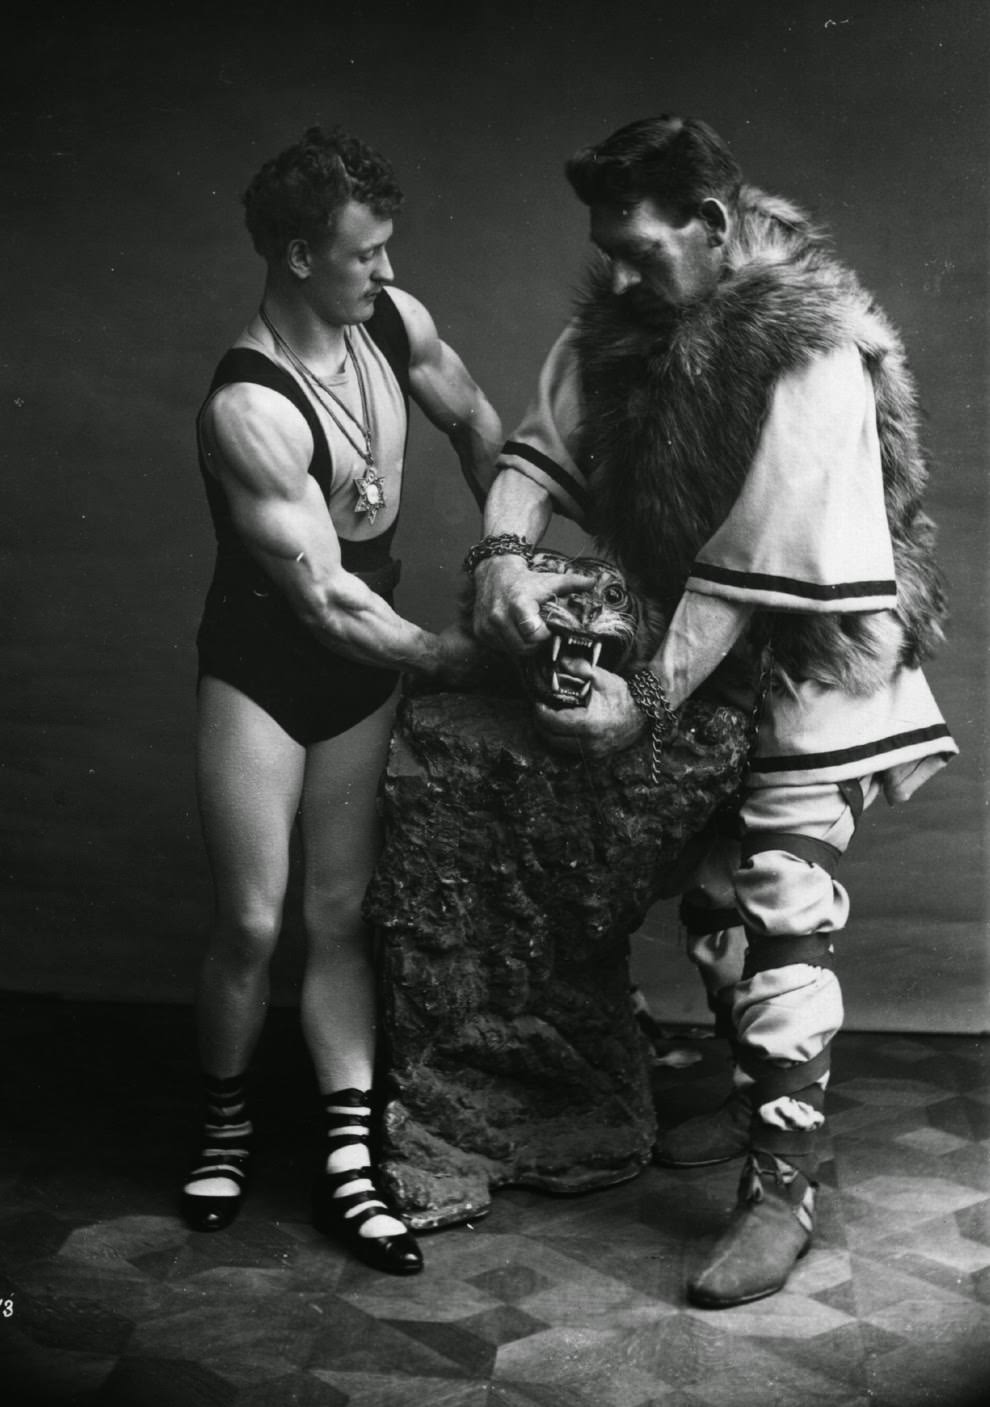 German strongman Eugene Sandow and Goliath wrestling with “a bear.”, 1910